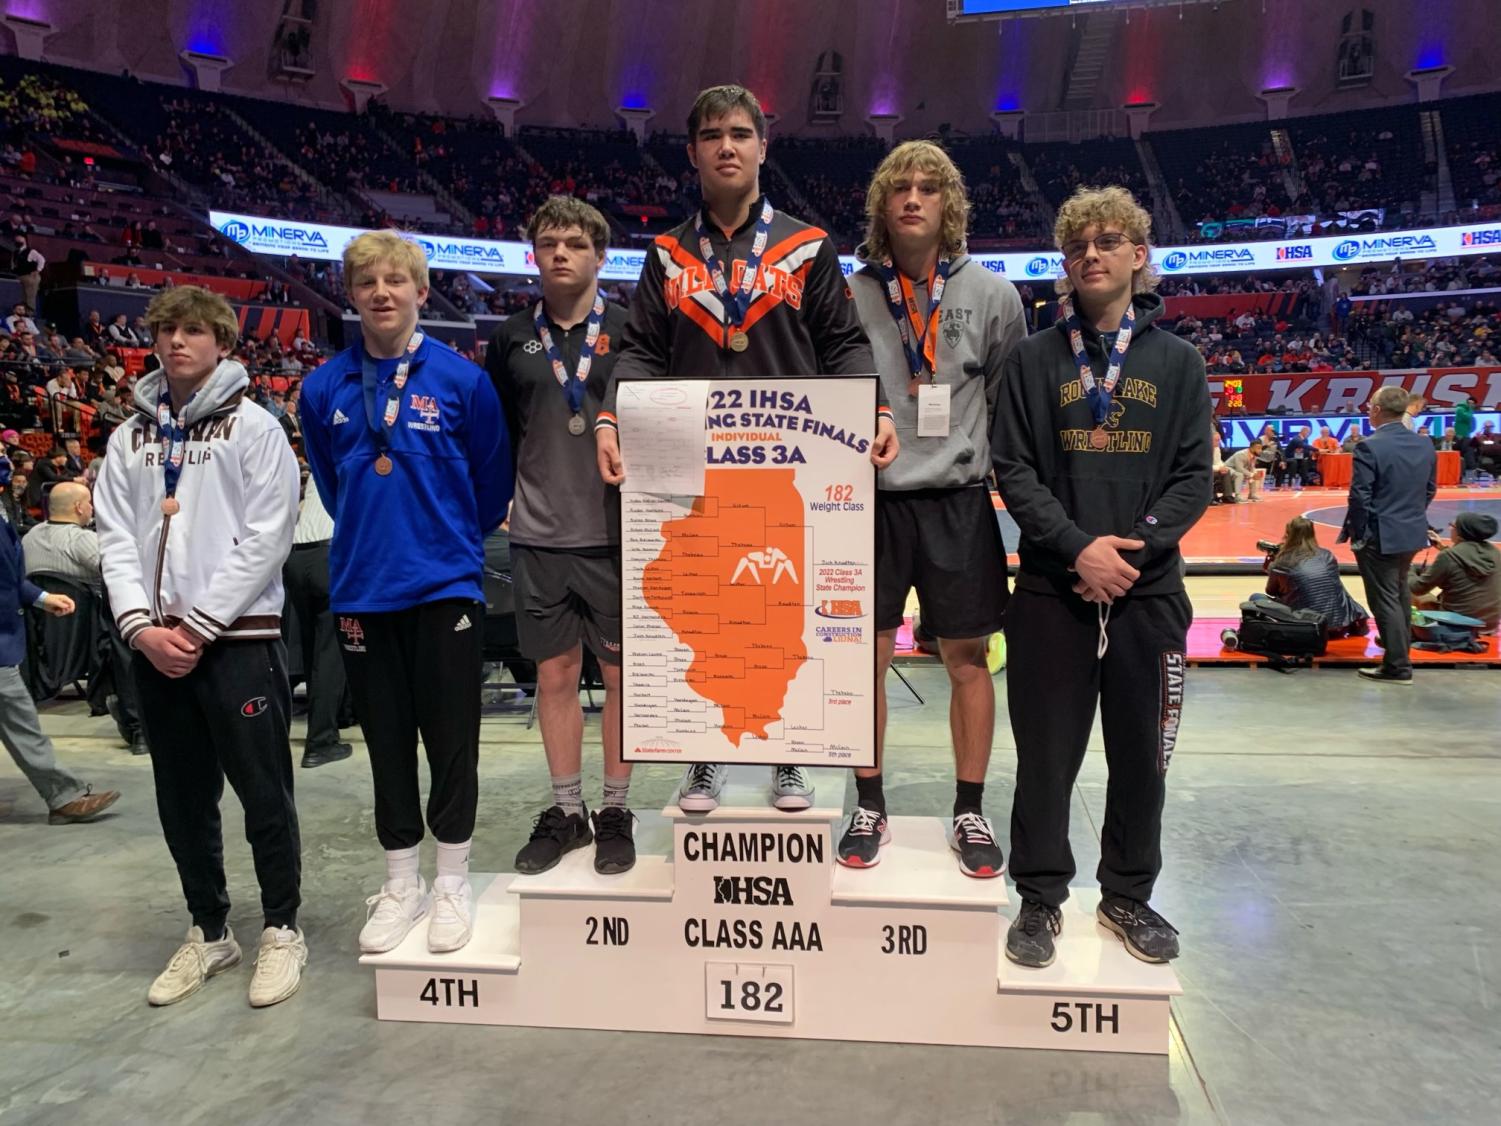 Knudten stands on the first position place on the podium after his win in the competition. He holds a “2022 IHSA State Finals Class 3A” poster. He also wears a medal that declares him as the IHSA 3A 182 lb State Champion.